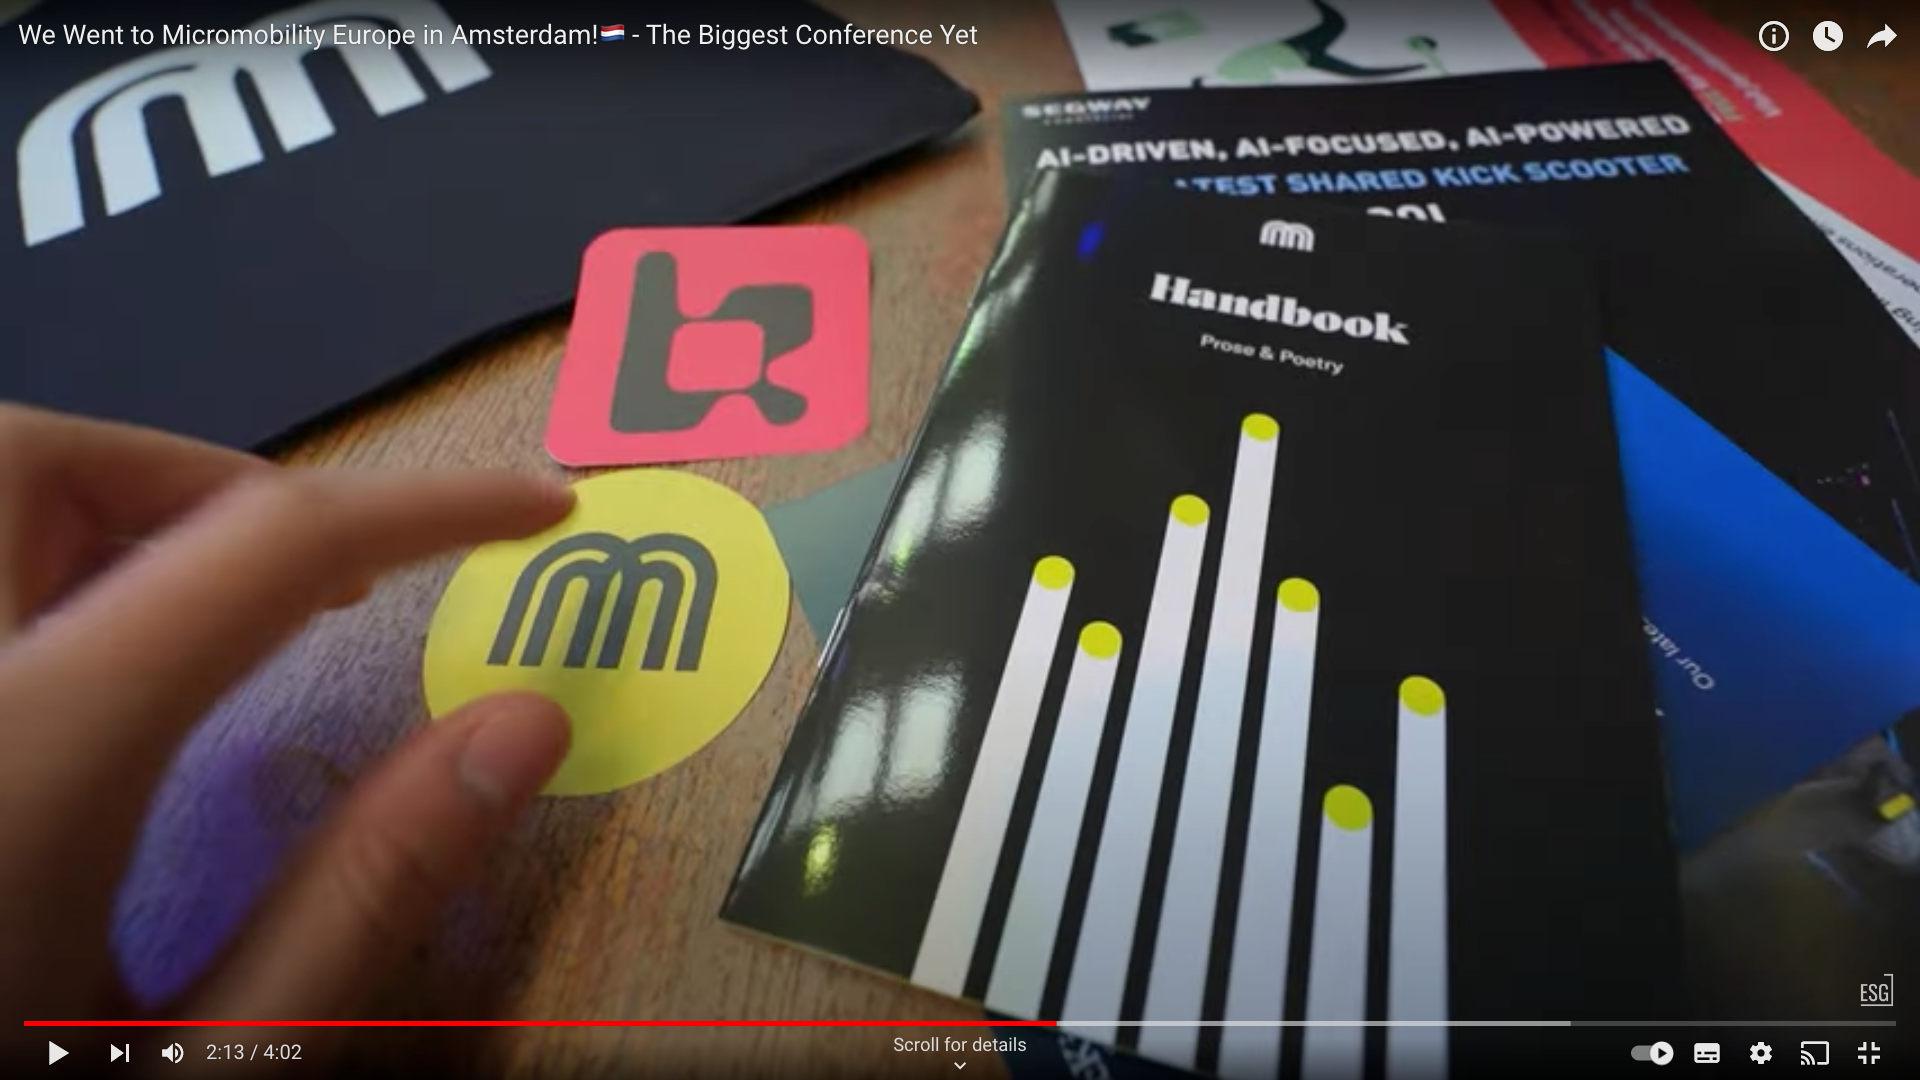 The micromobility handbook by micromobility.io